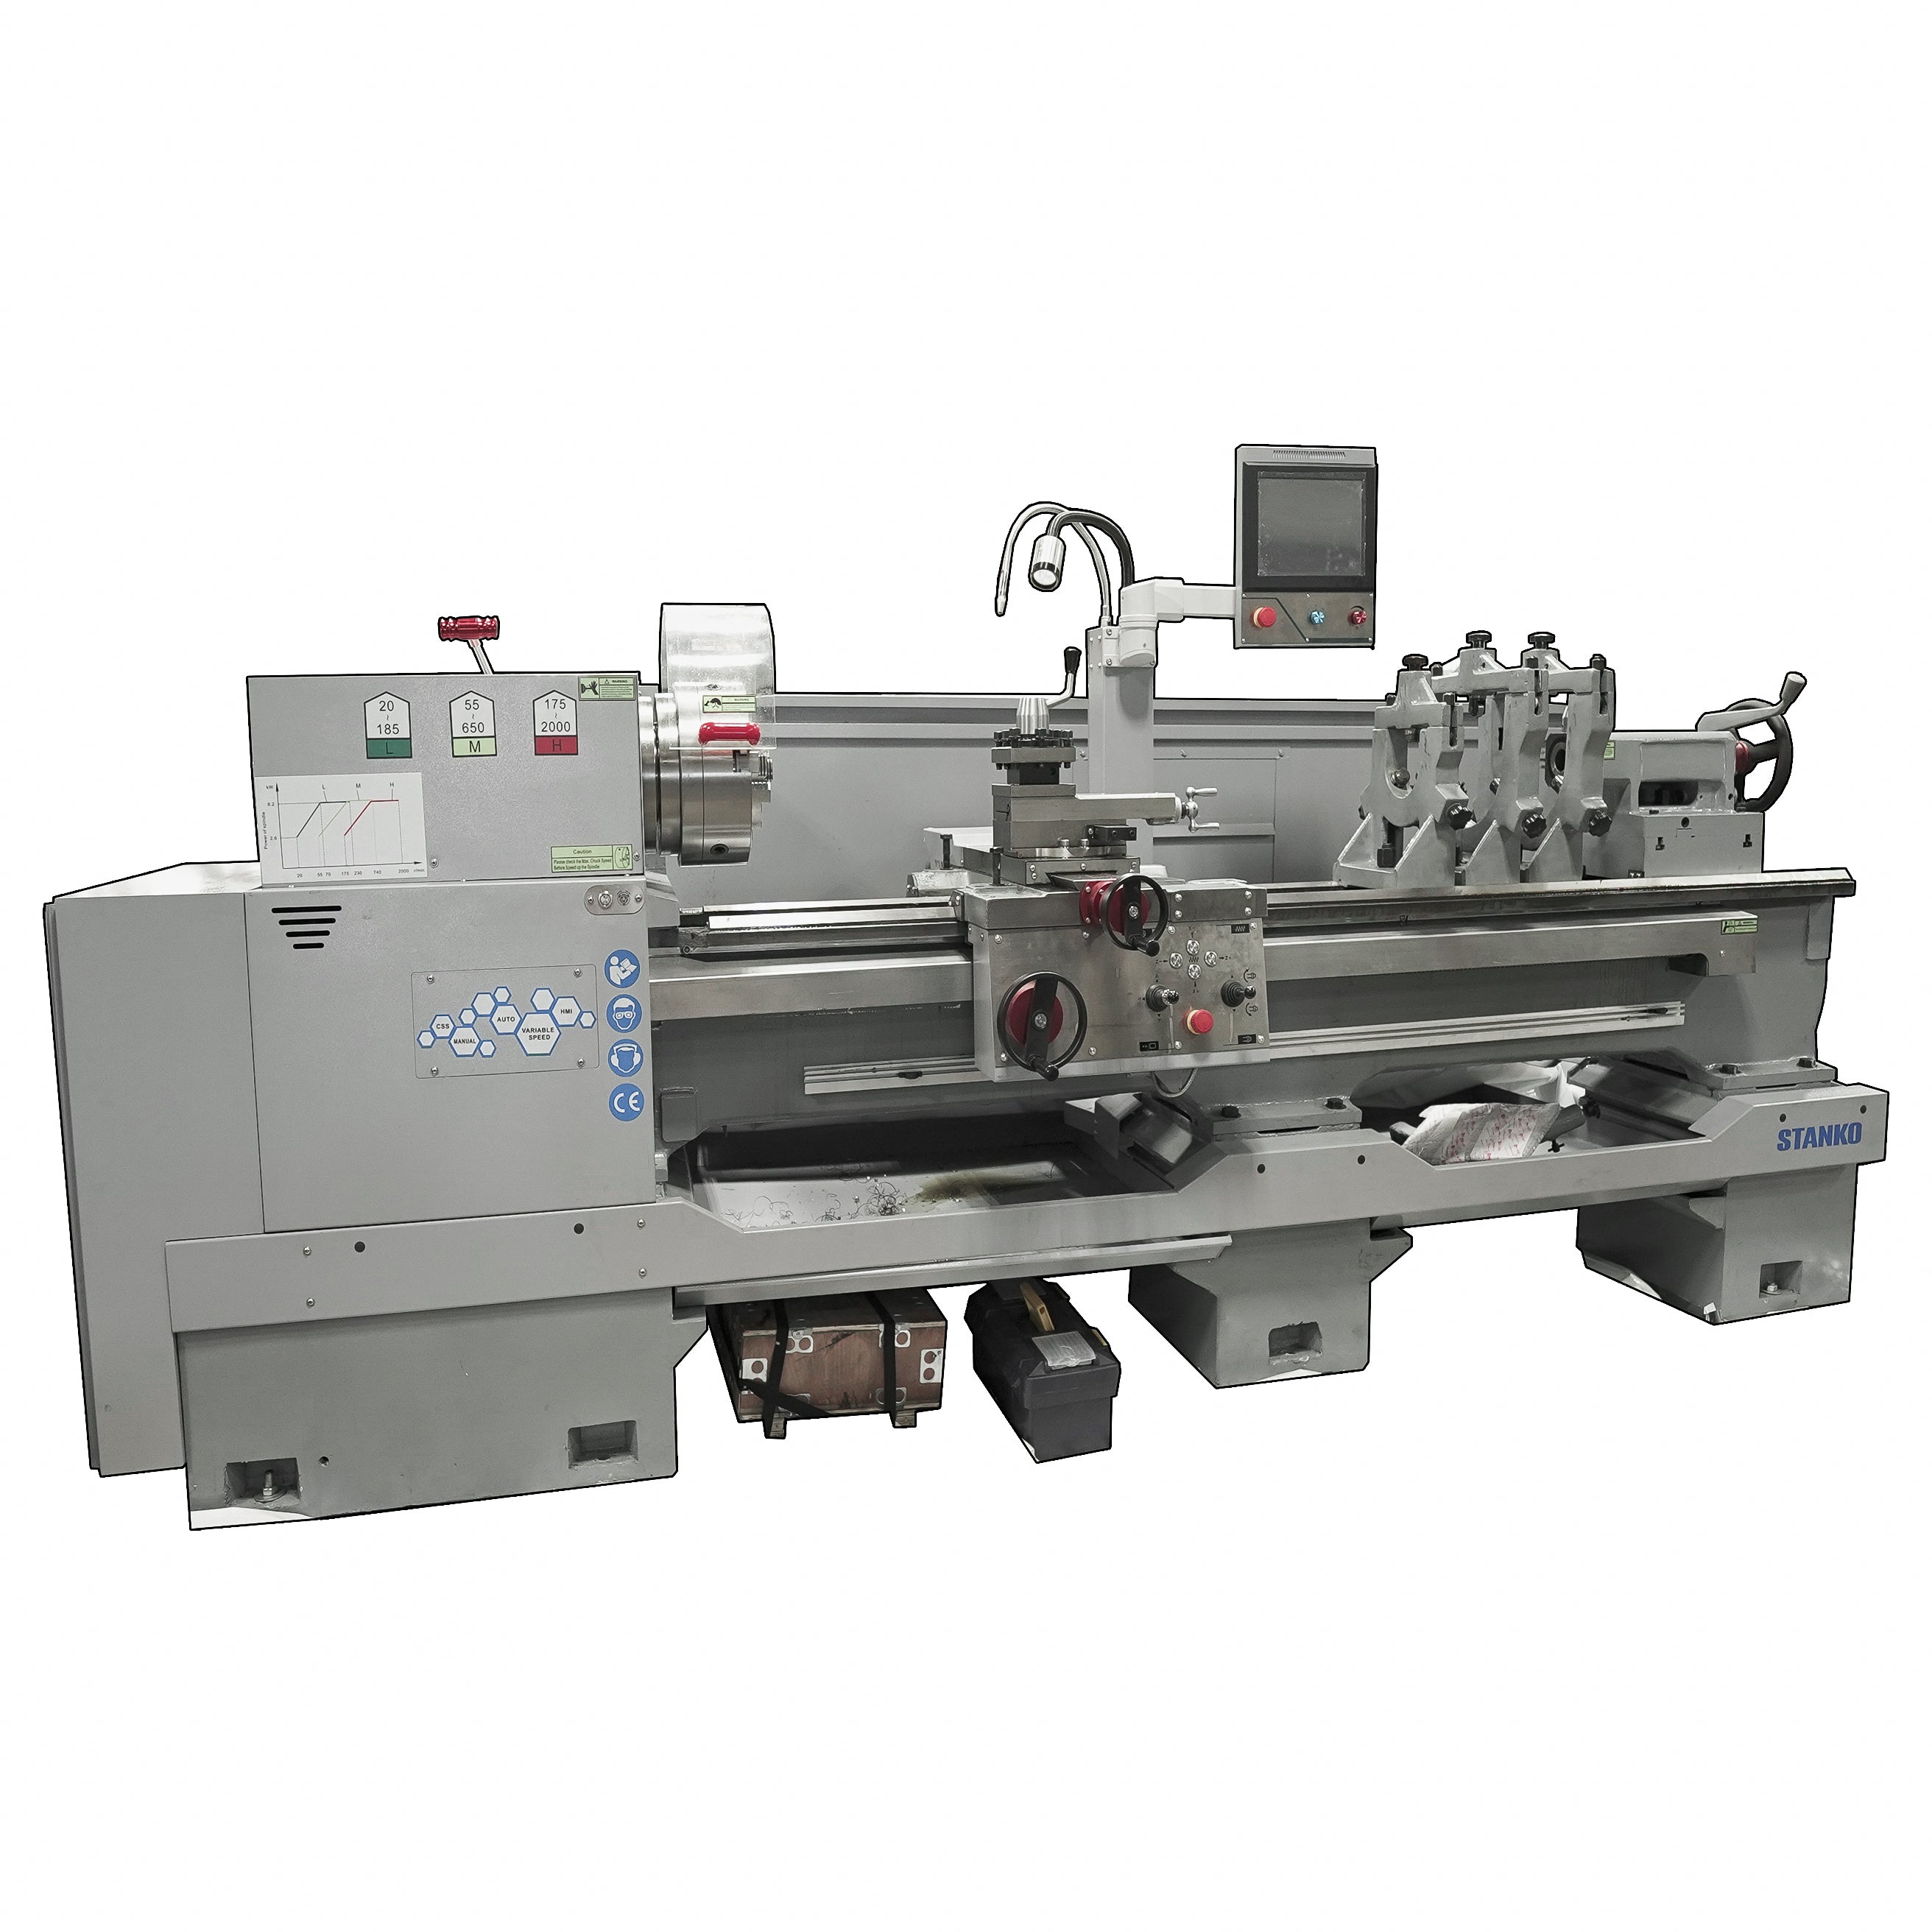 We have a new & used lathe for sale in our machine shop in Edmonton Alberta Canada. Smart Lathe is our new line of manual lathes that are made to simplify work with programmable threading without G-Code (CNC) required. Variable speed and touch screen settings so you don't need to crank a lot of handles. Stan Canada Industrial Machine Tools Inc